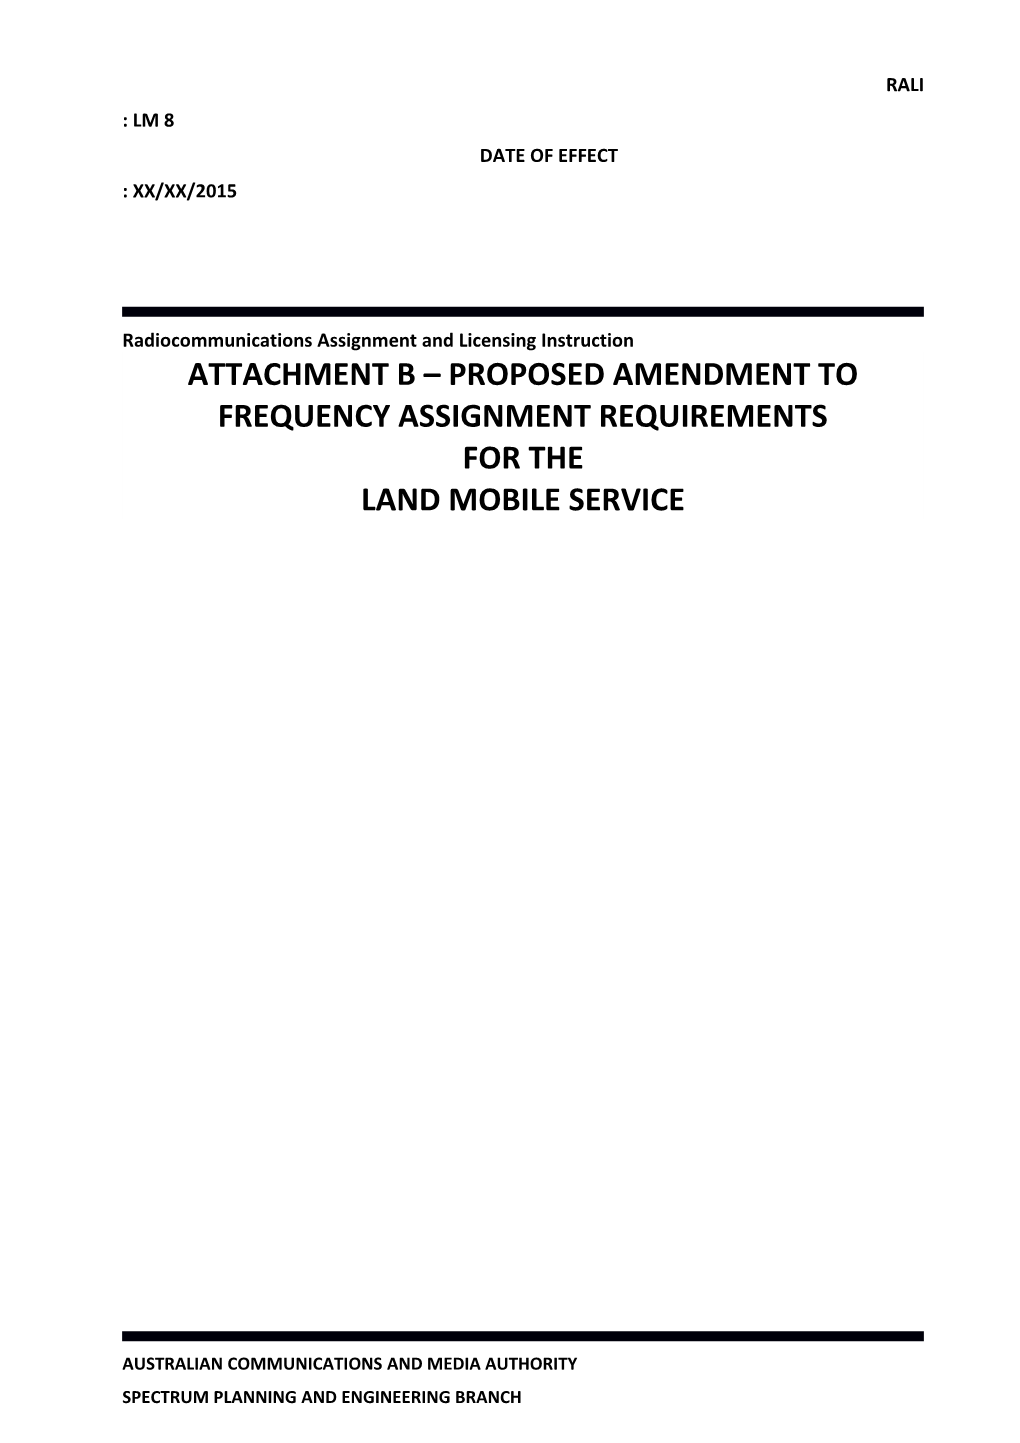 6.9 Additional Requirements for Users of Harmonised Government Spectrum (HGS) and HGSA